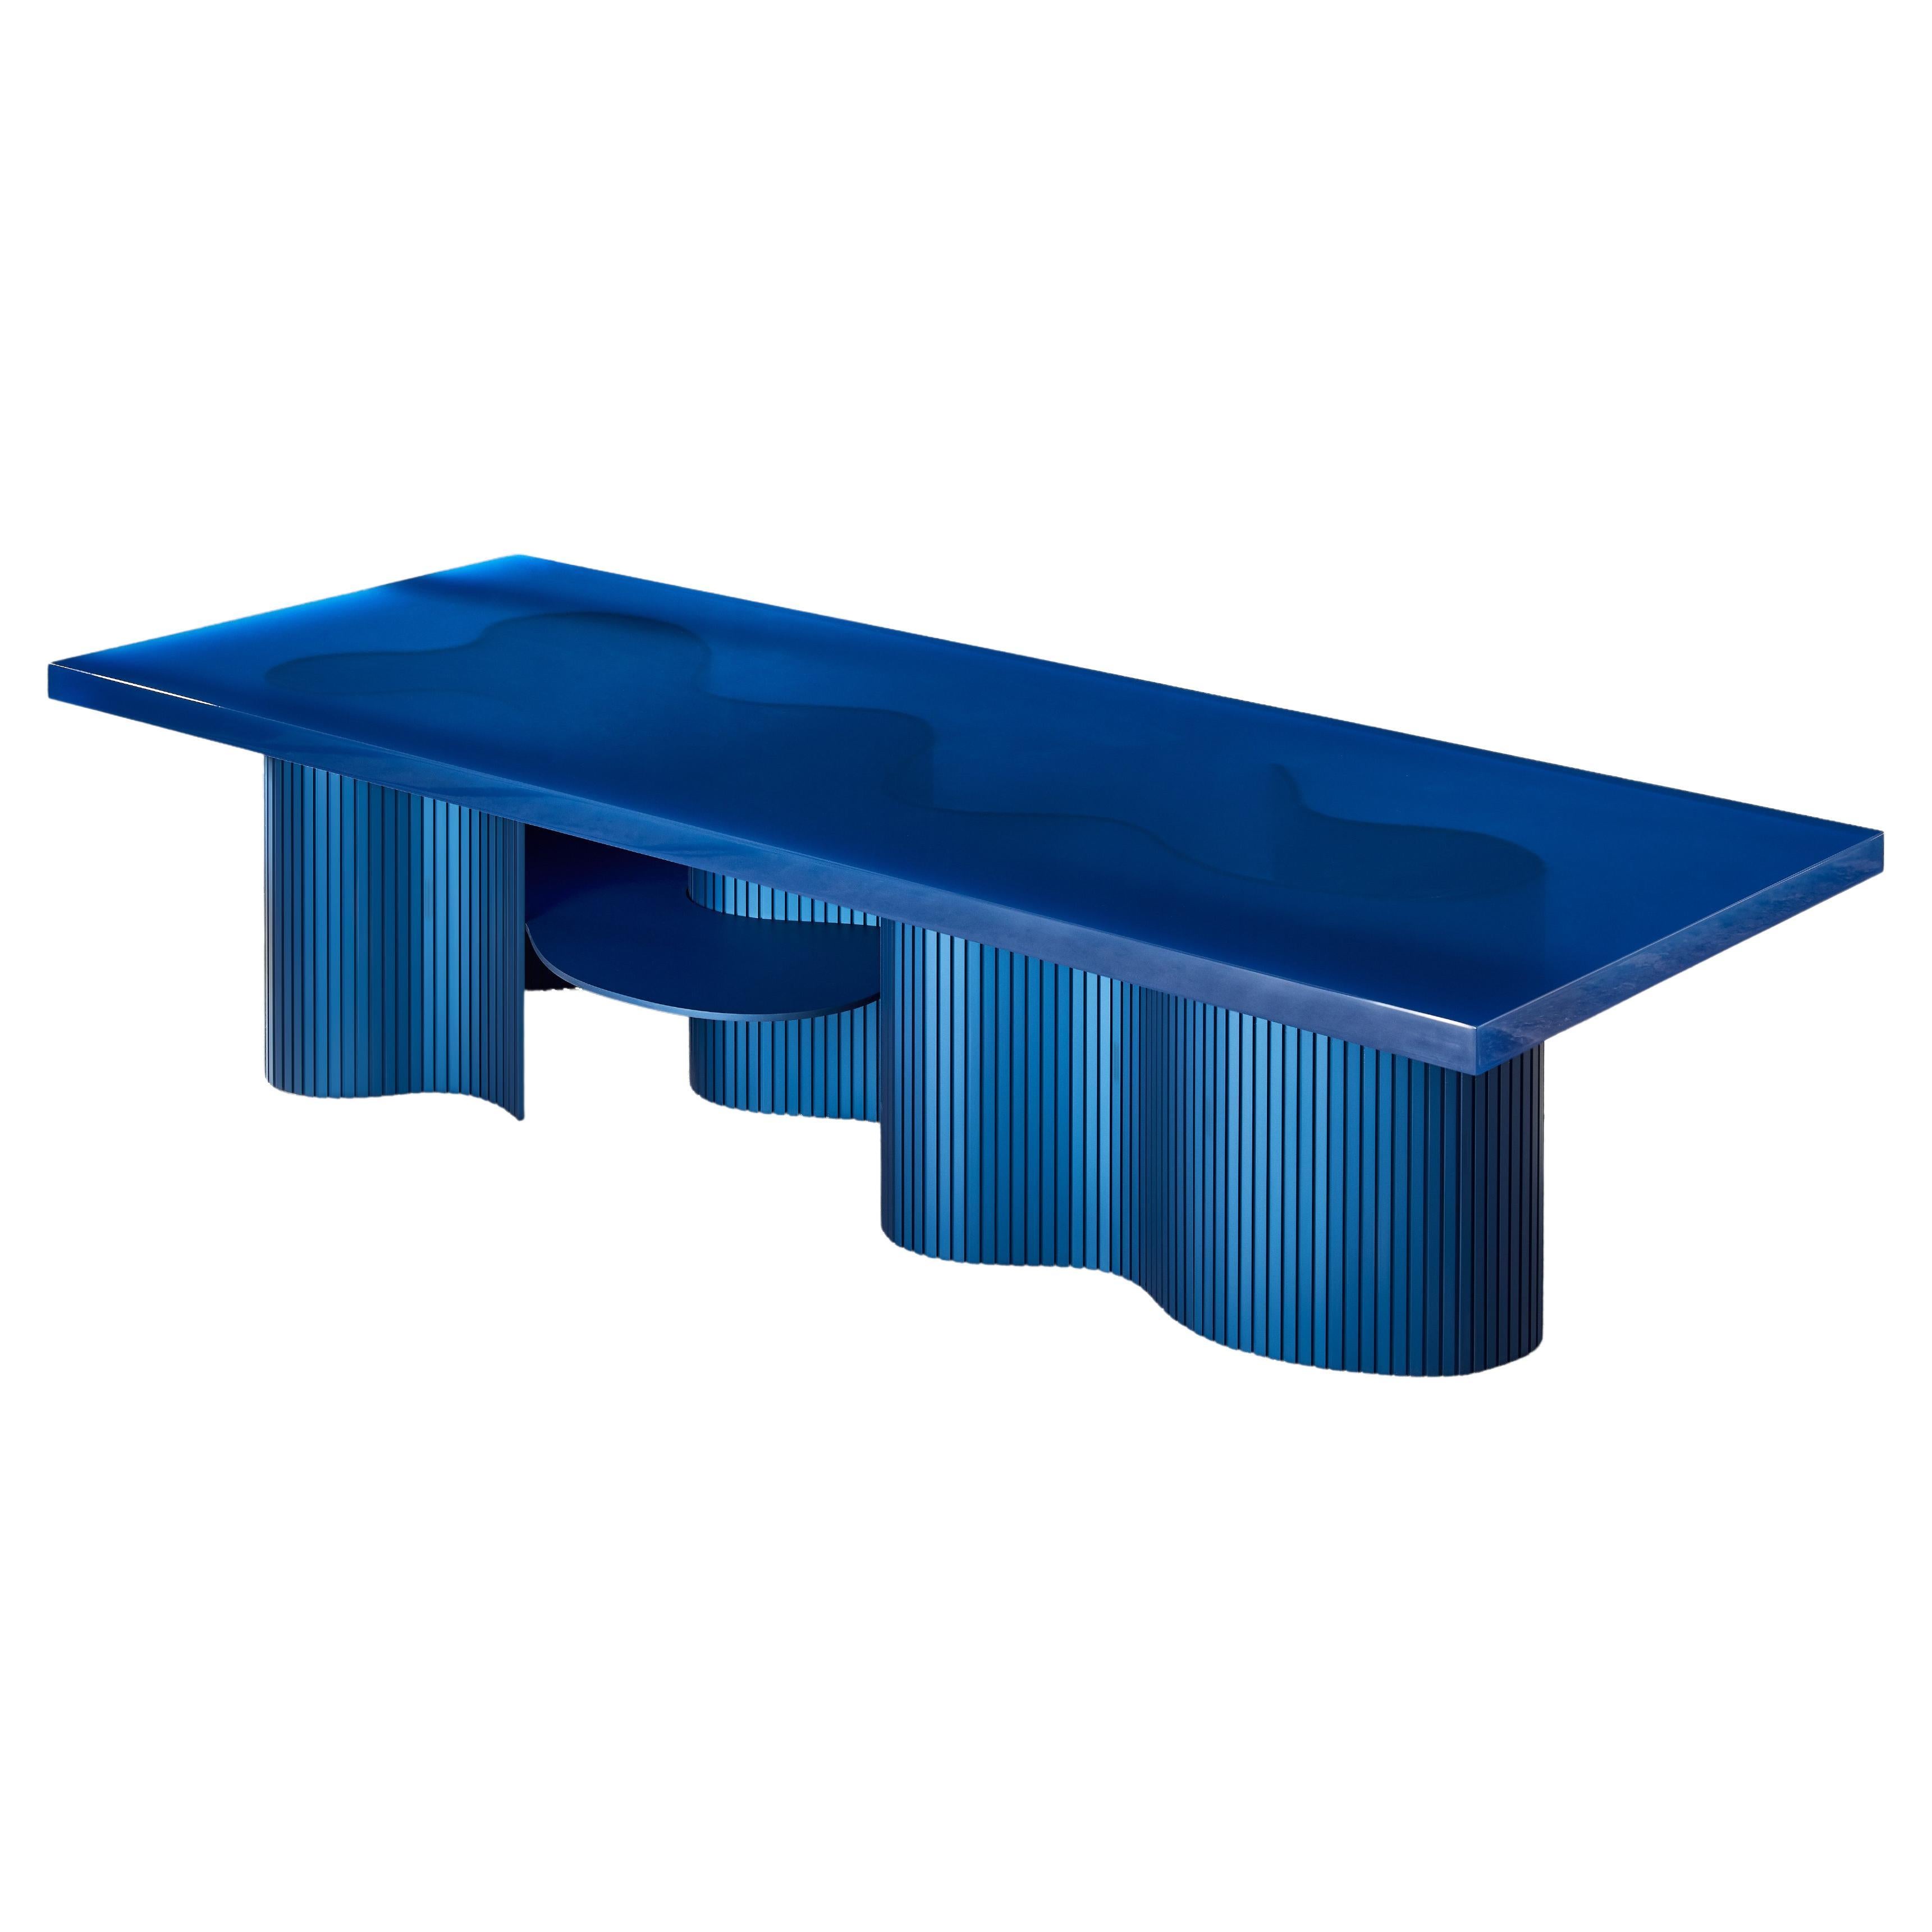 Contemporary Low Table with Shelves, Blue Polished Resin, by Erik Olovsson For Sale